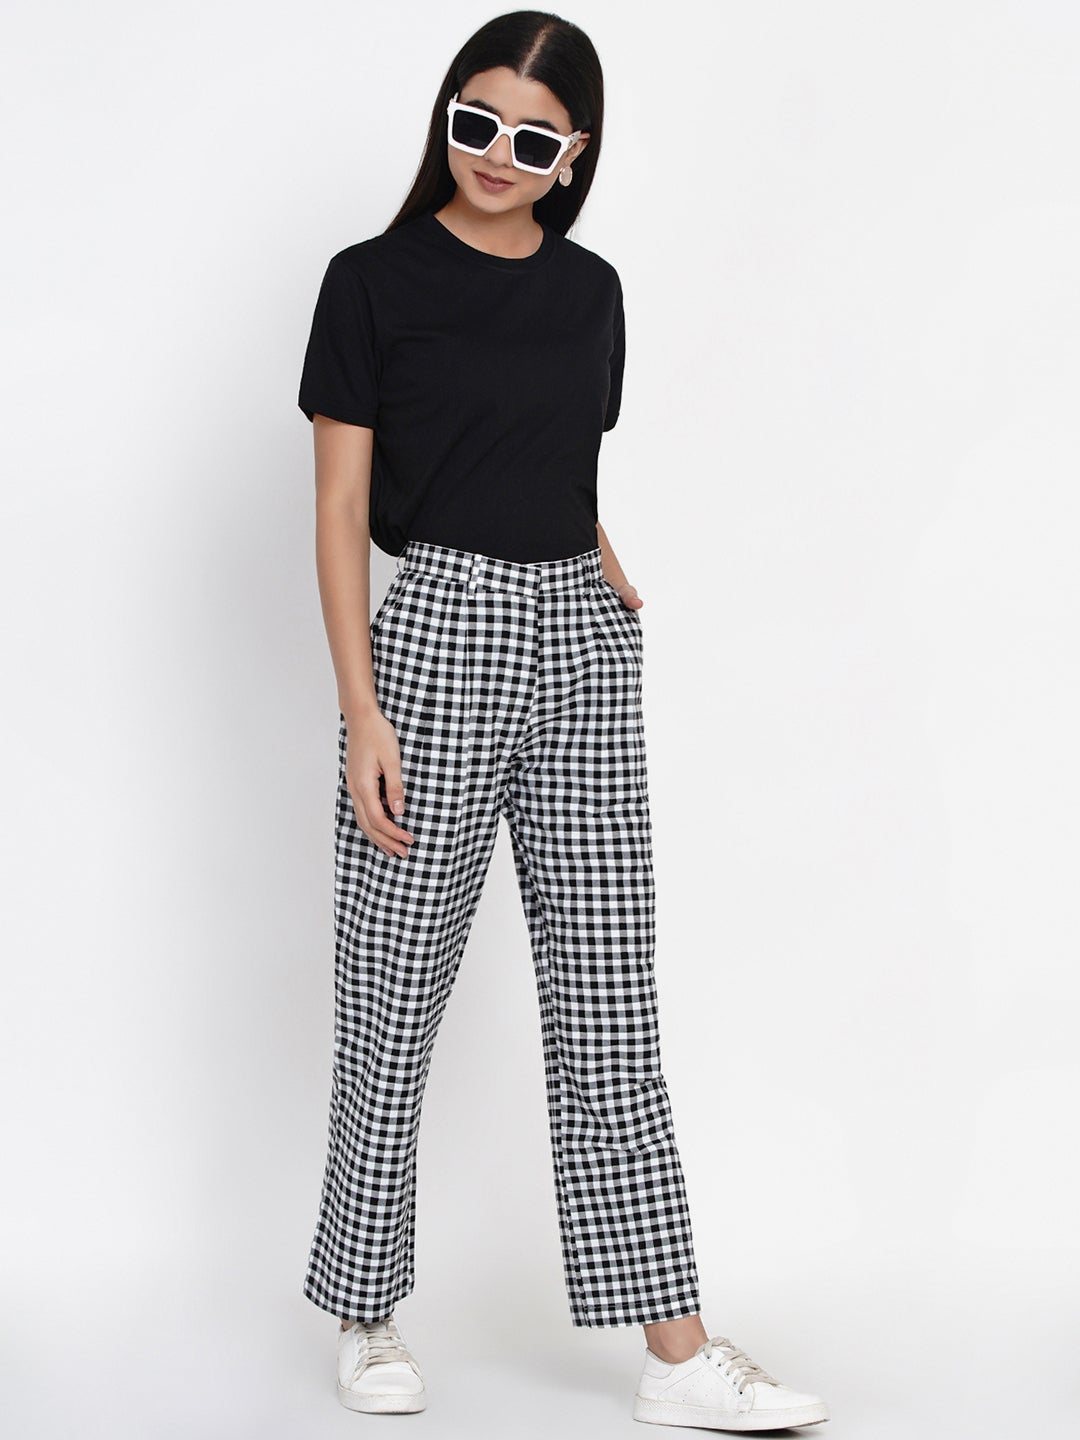 Handloom Black And White Check Casual Pant